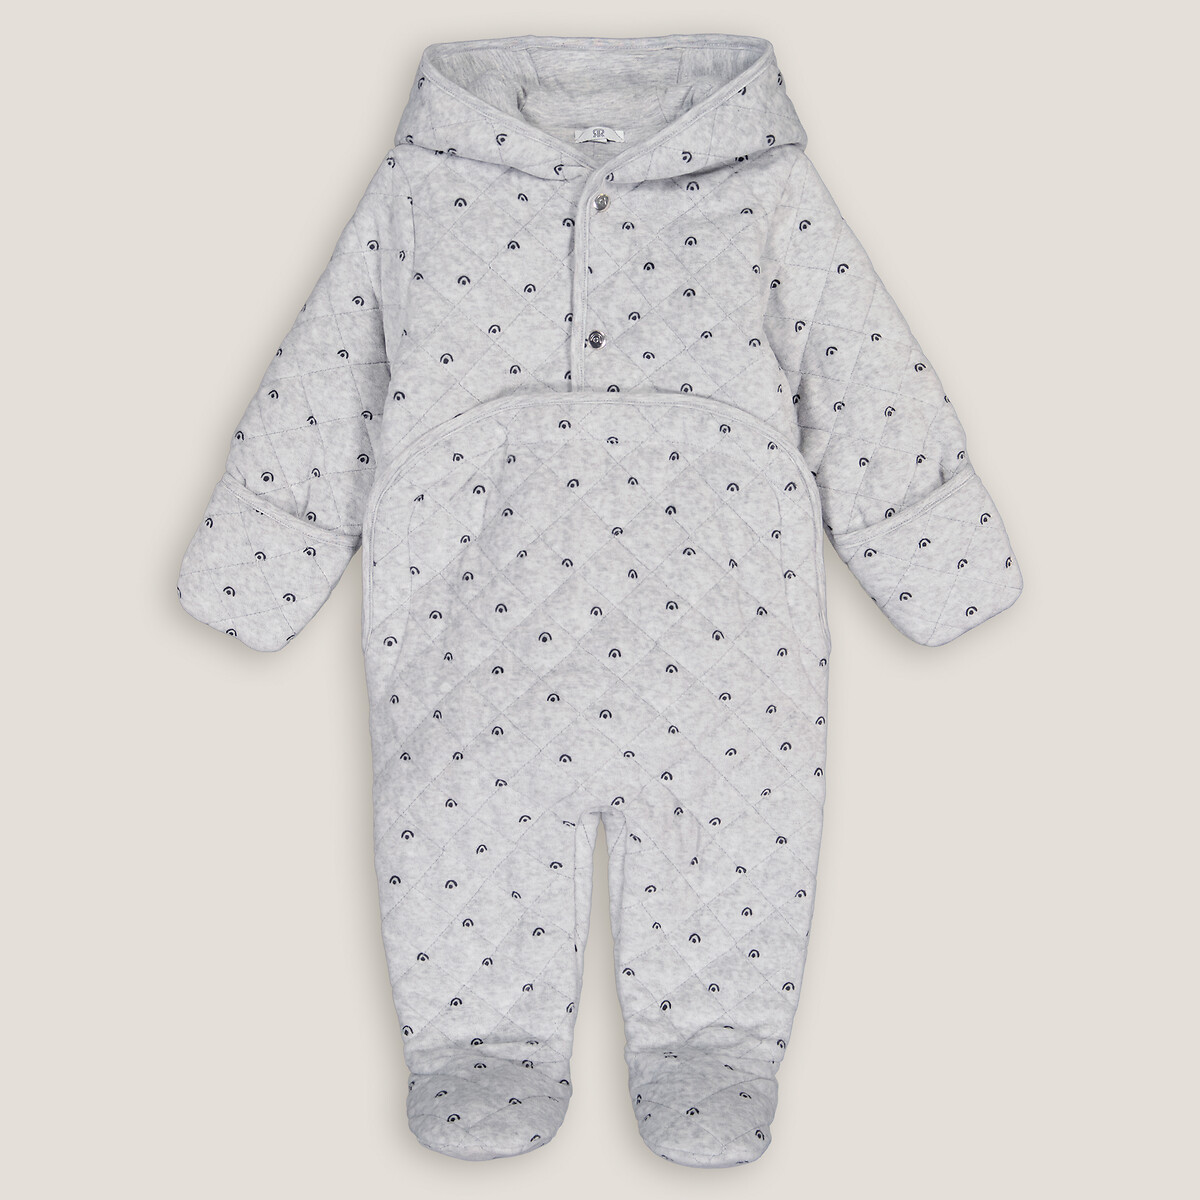 Printed Velour Hooded Pramsuit In Cotton Mix, 1 Month-18 Months By La Redoute